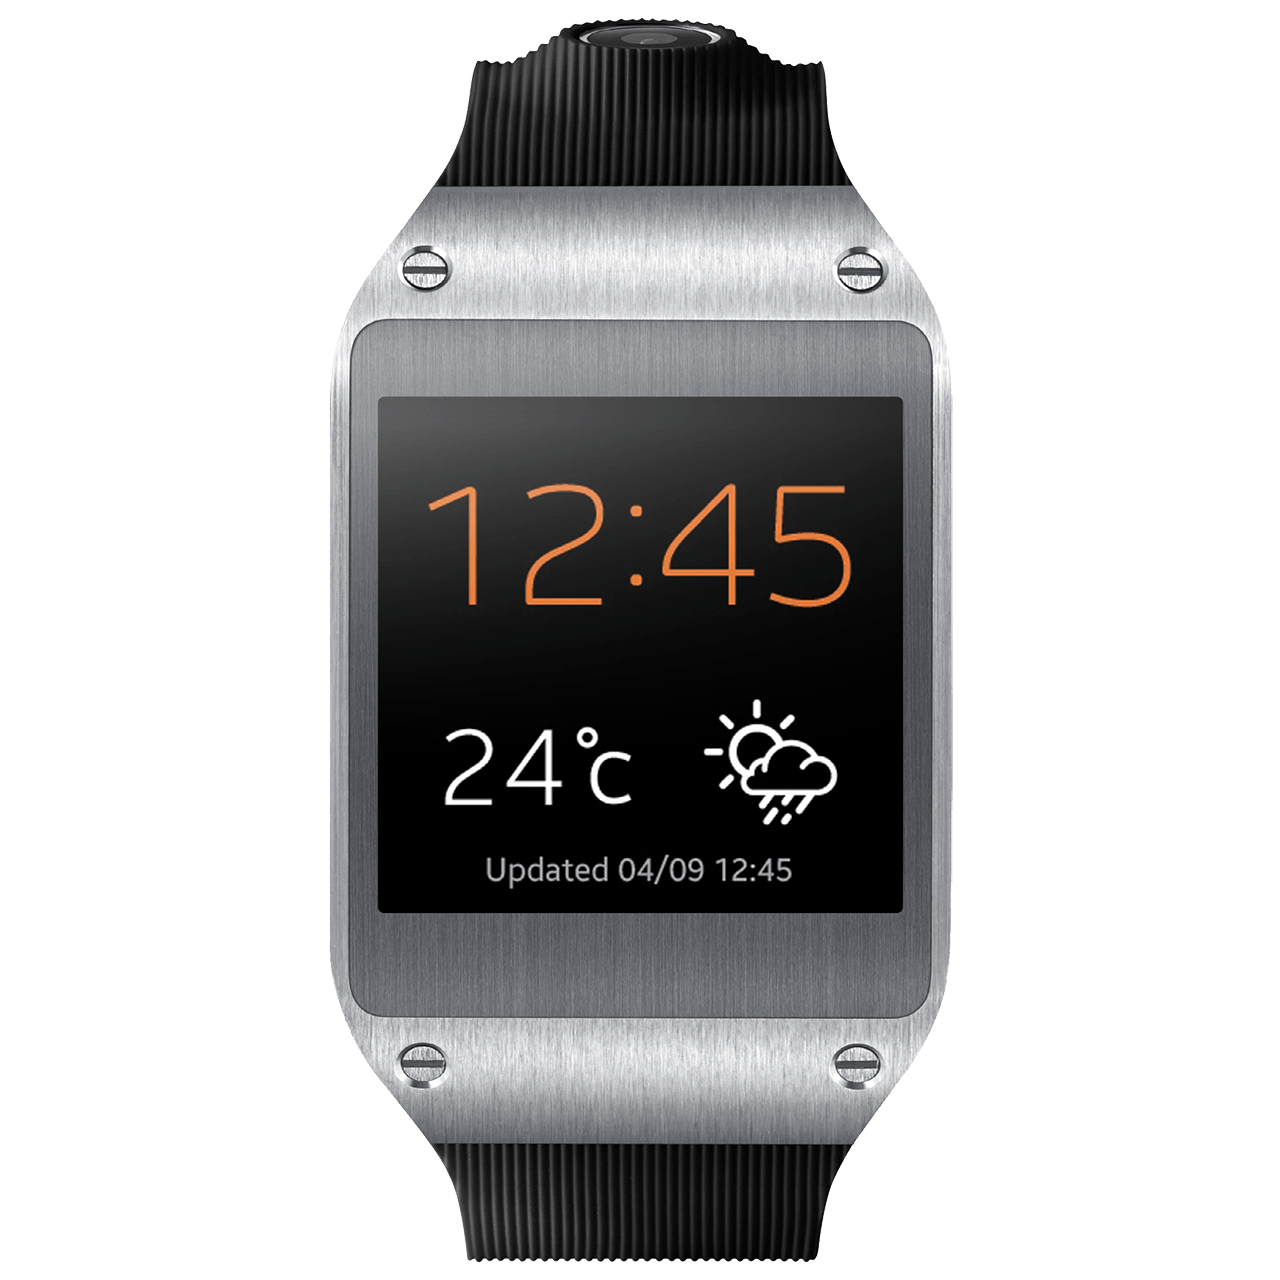 Wristwatch Smartphone Samsung Png Image PNG Image